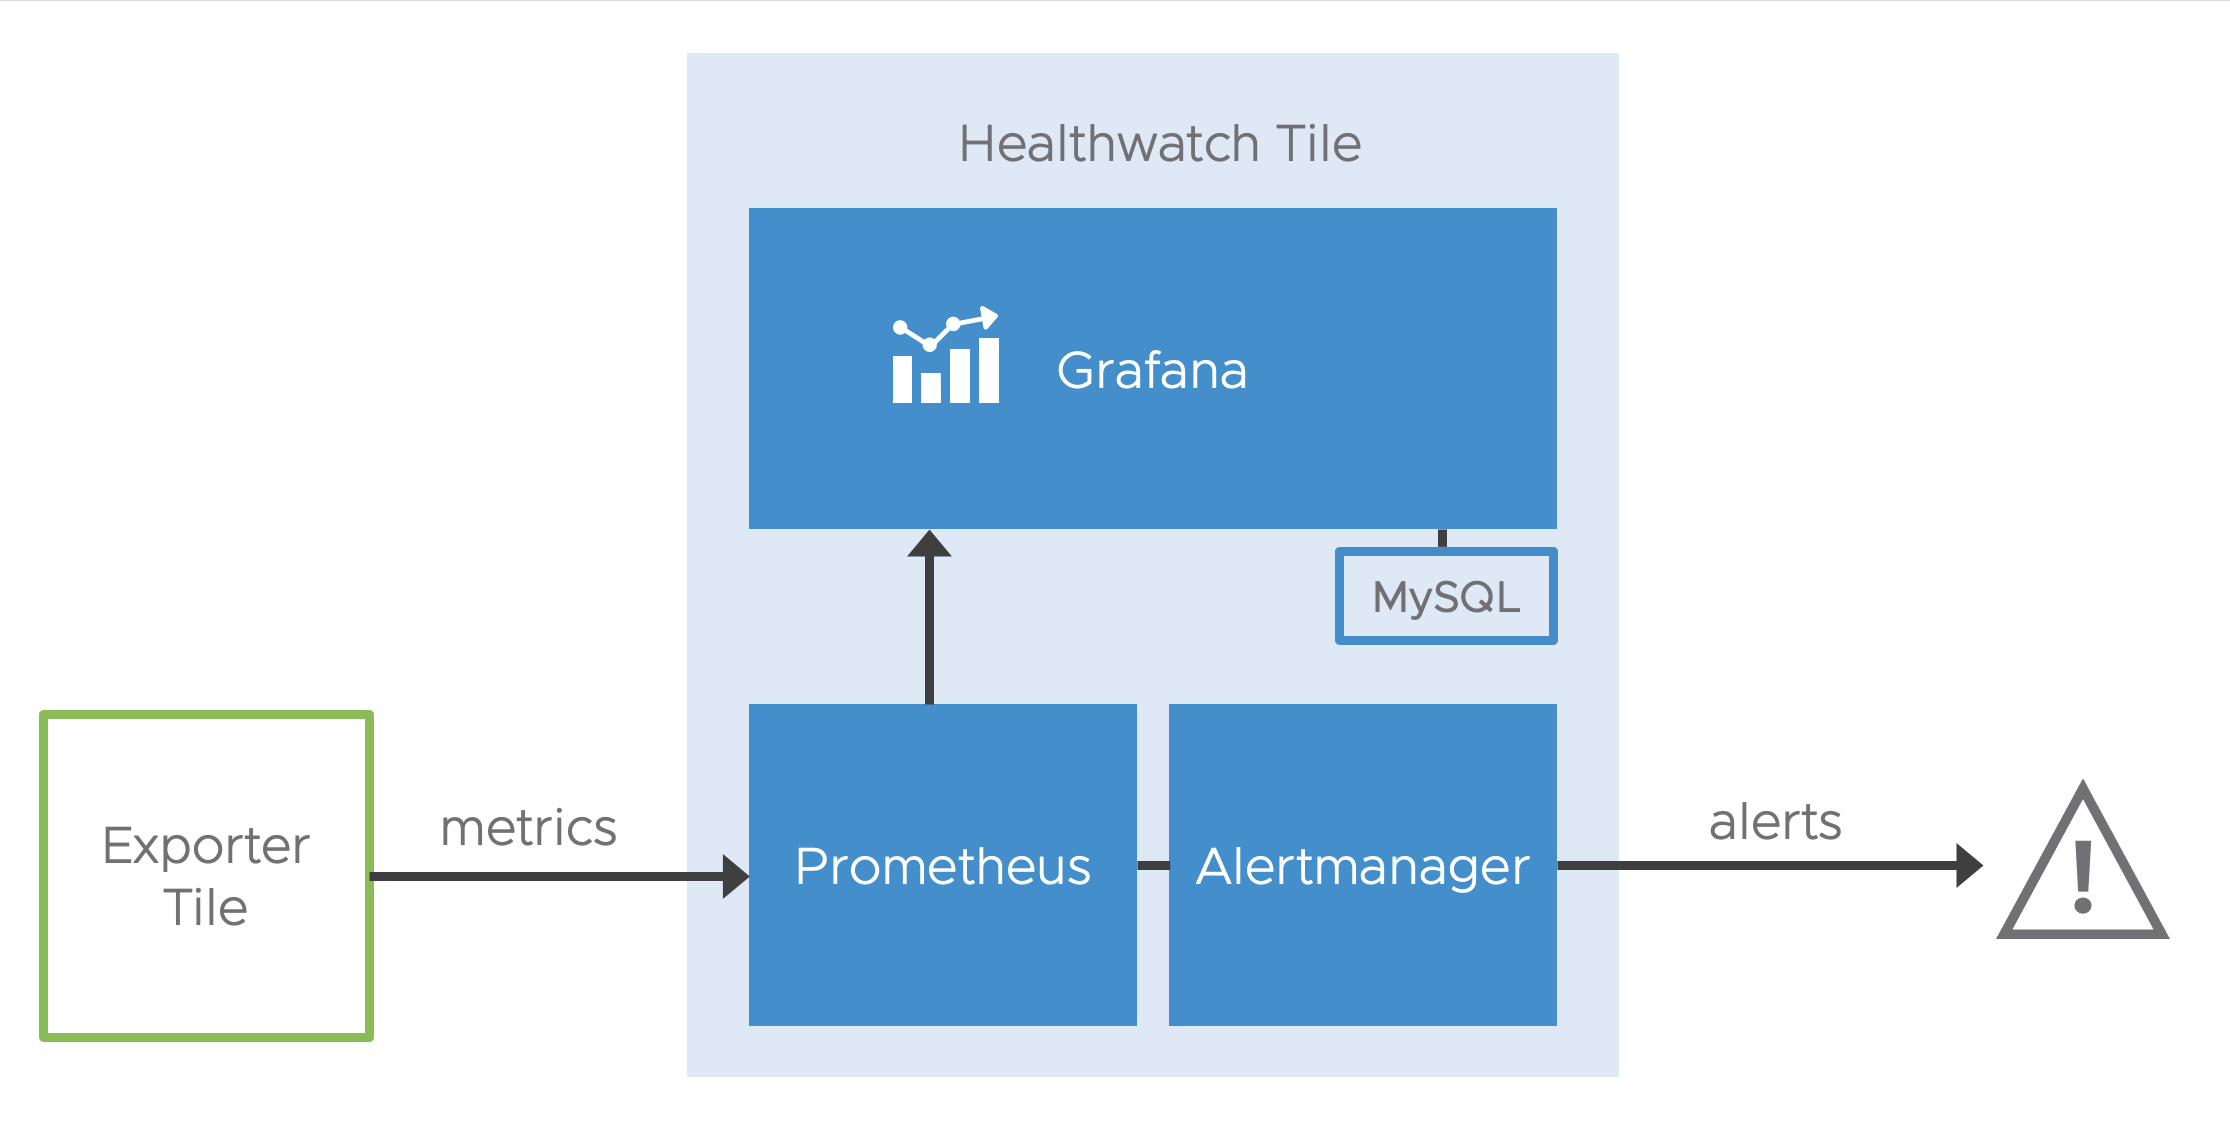 A Healthwatch Exporter tile, Healthwatch tile and an alert. An arrow points from the Healthwatch Exporter into the Healthwatch tile. Inside the Healthwatch tile are Prometheus, Grafana, Alertmanager and MySQL instances. An arrow points from Prometheus to Grafana and from Prometheus
through Alertmanager to alerts. MySQL is next to Grafana.